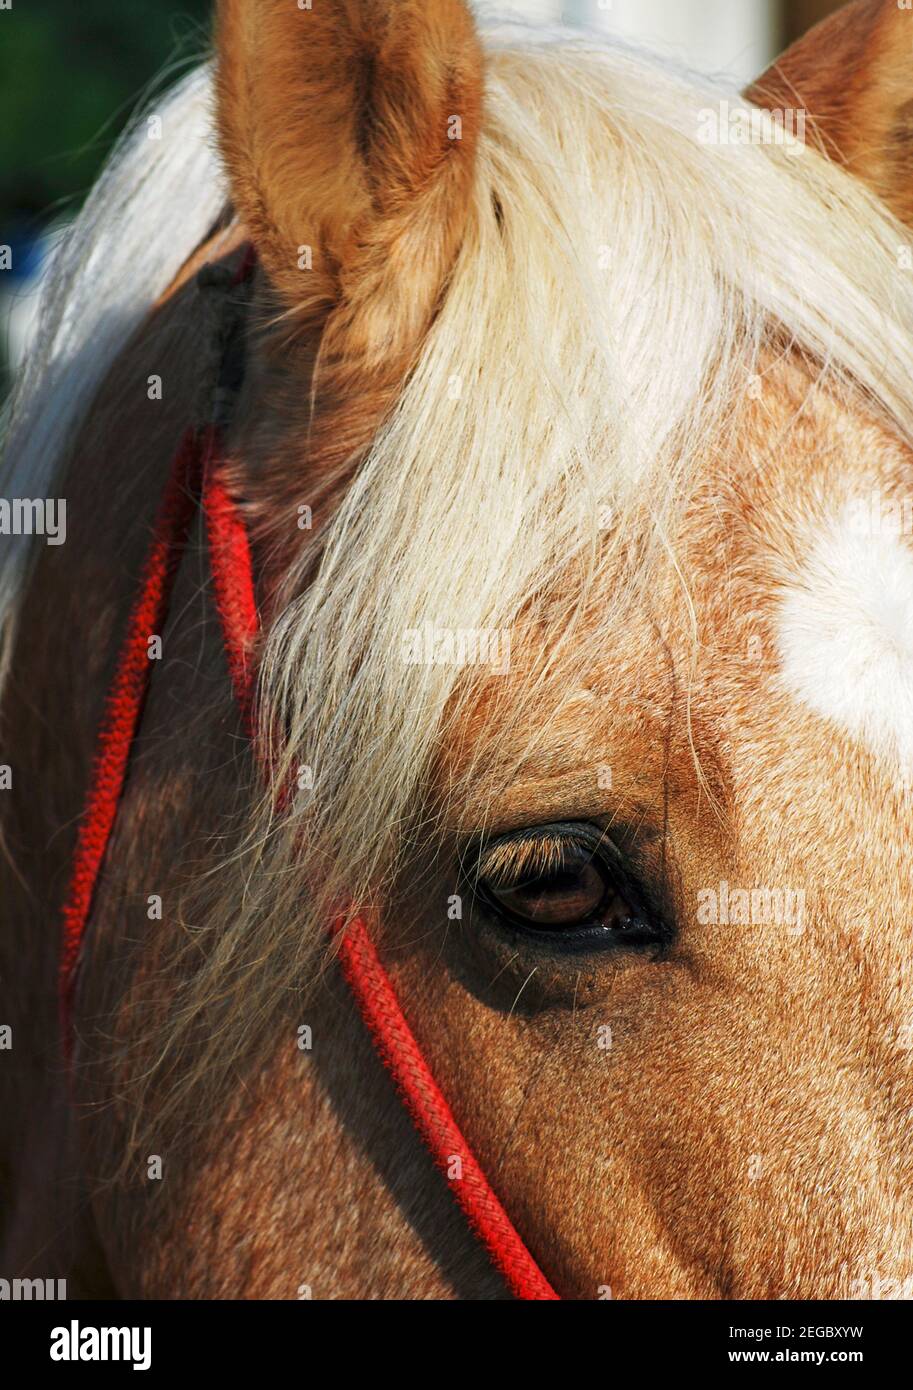 detail of  horse with blond mane Stock Photo